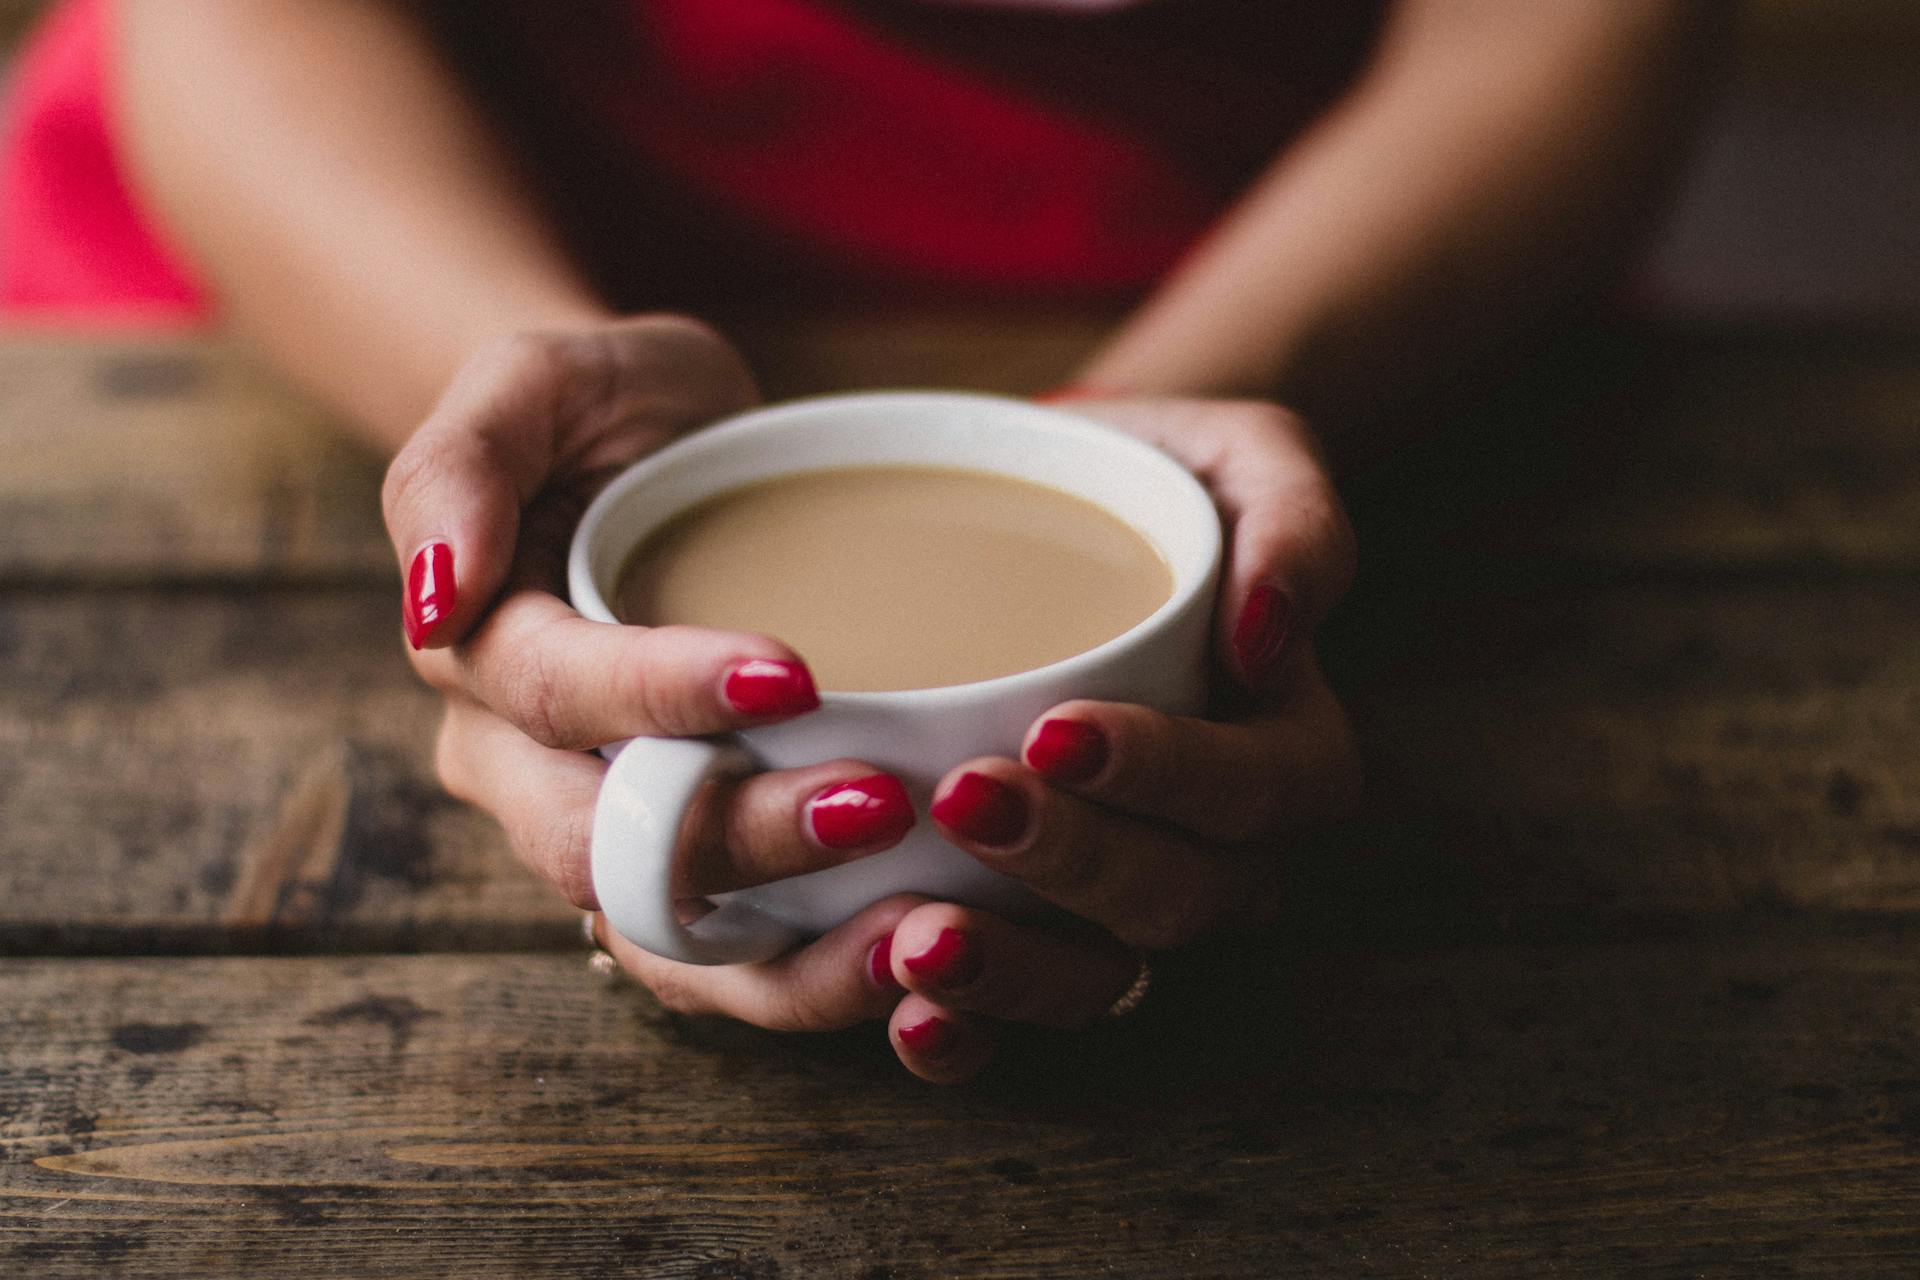 A person holding a cup of coffee | Source: Pexels